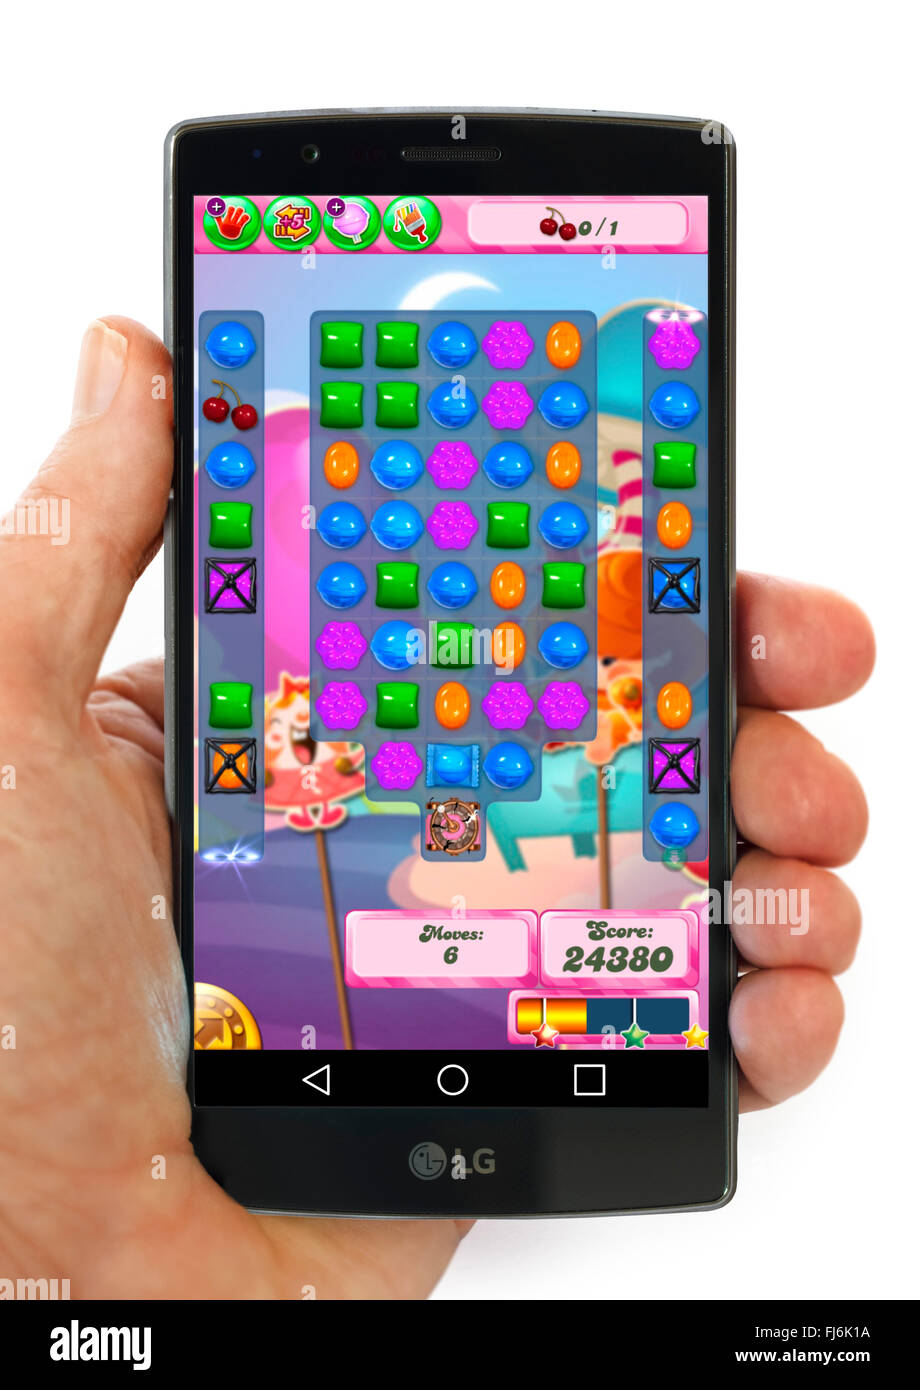 Candy Crush Saga on an LG G4 5.5 inch Android smartphone Stock Photo